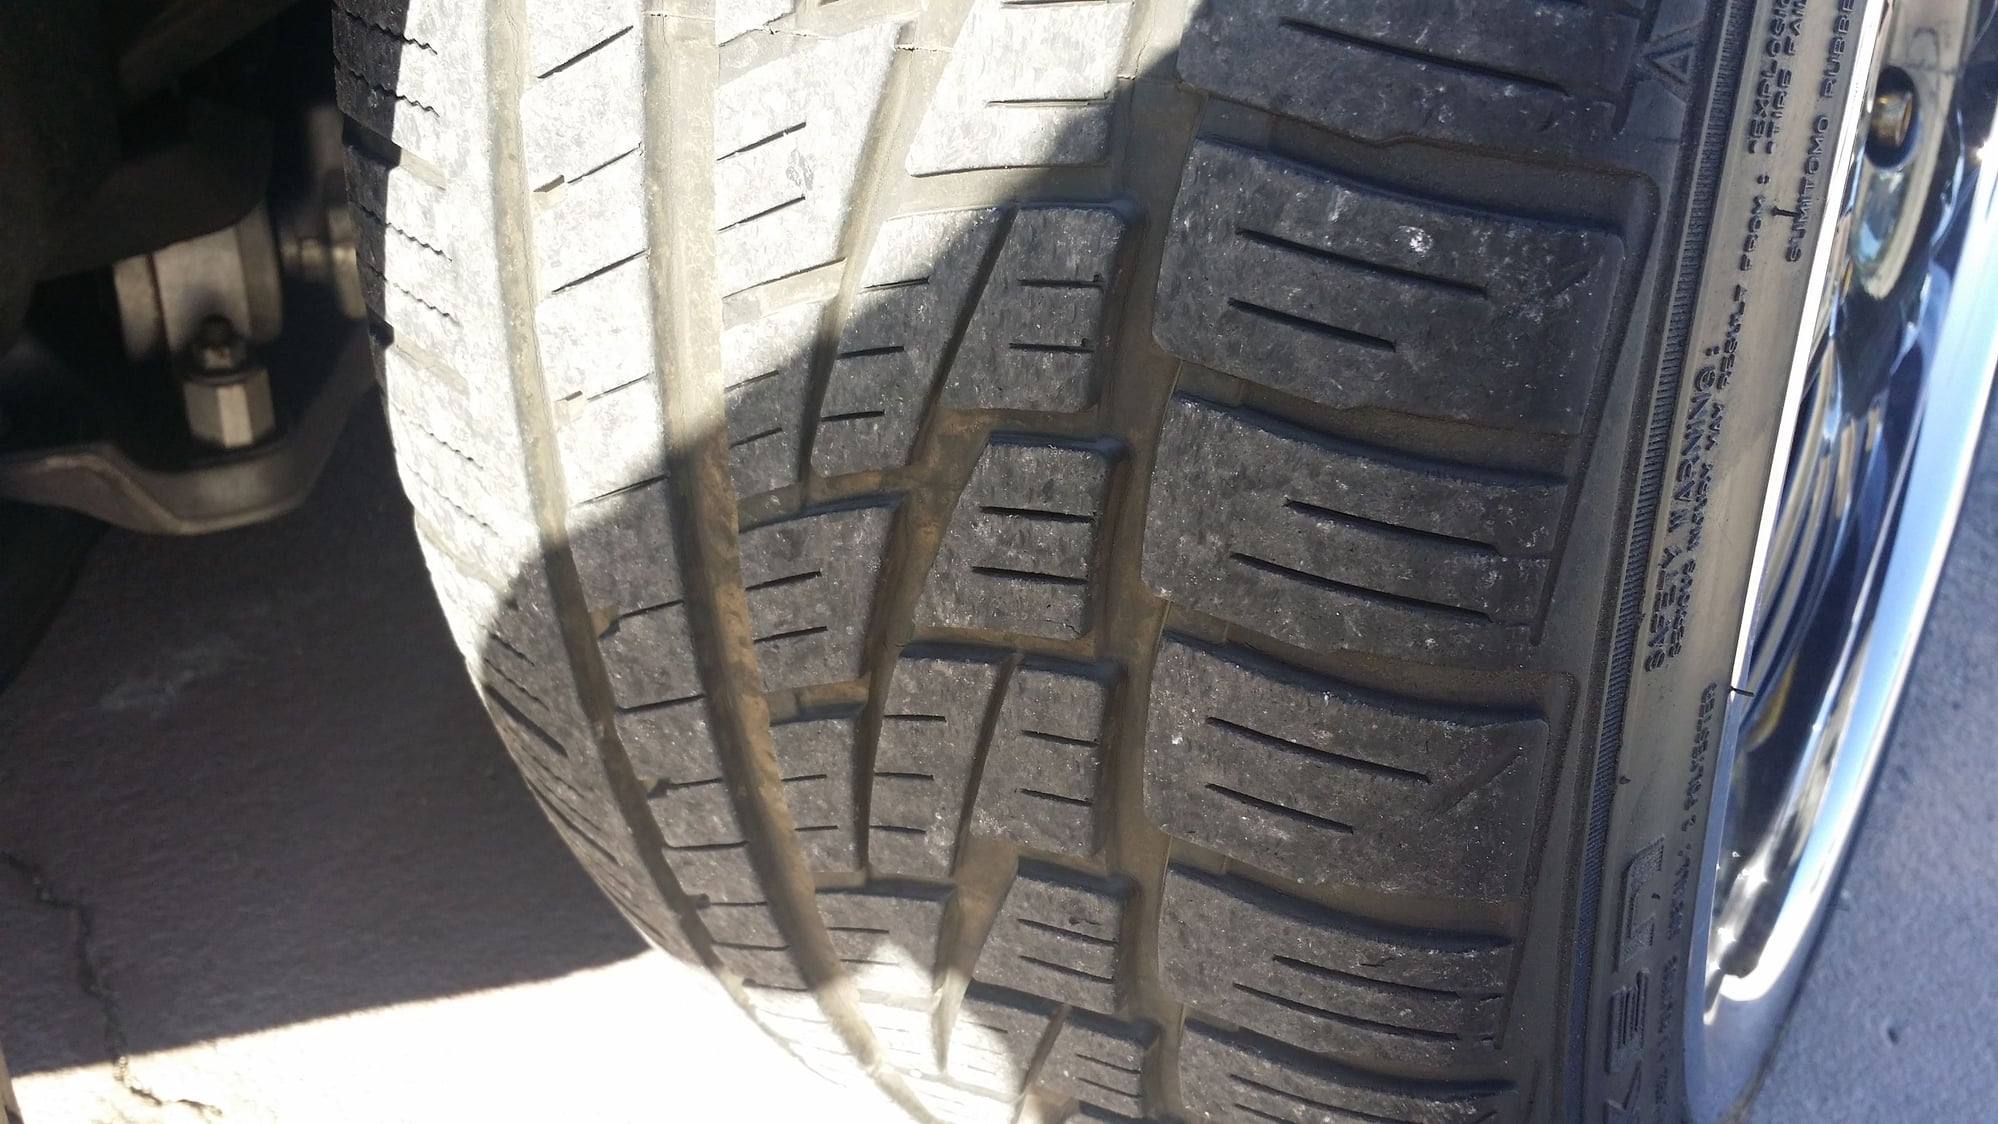 Wheels and Tires/Axles - 20" 3 piece rims w tires... $600 - Used - Spring Hill, FL 34608, United States